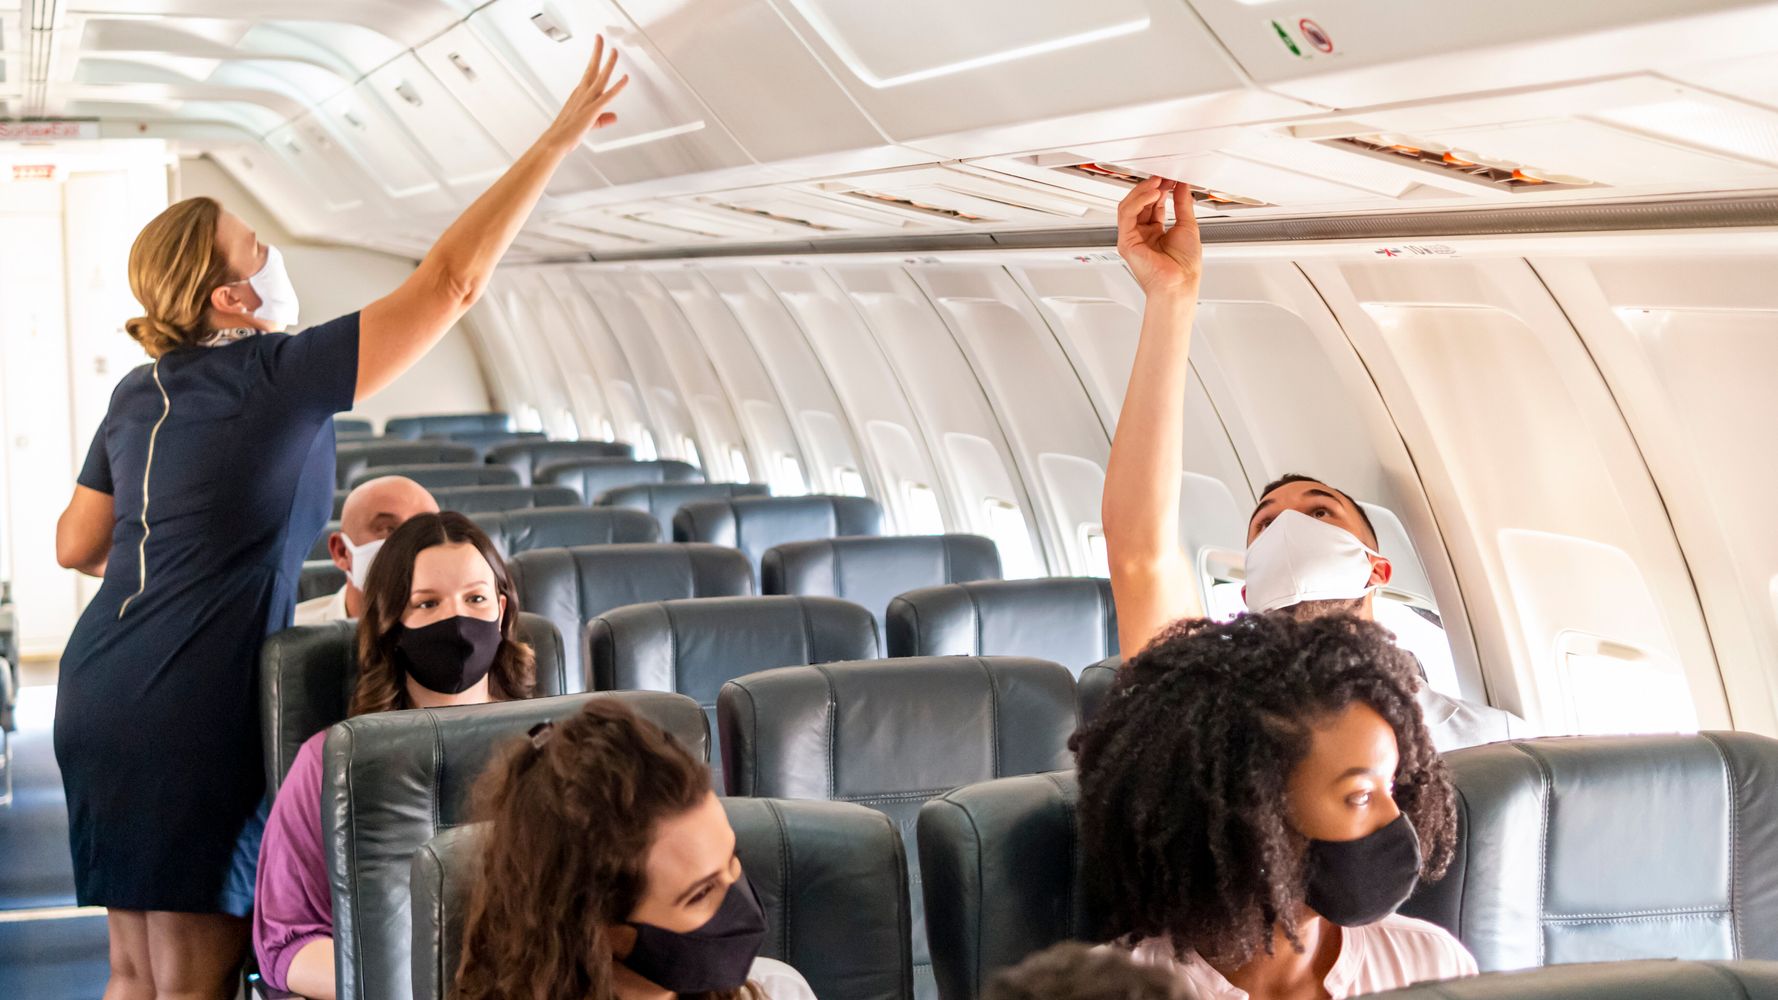 Flight Attendant Abuse Is Escalating. Here's How Passengers Can Help.